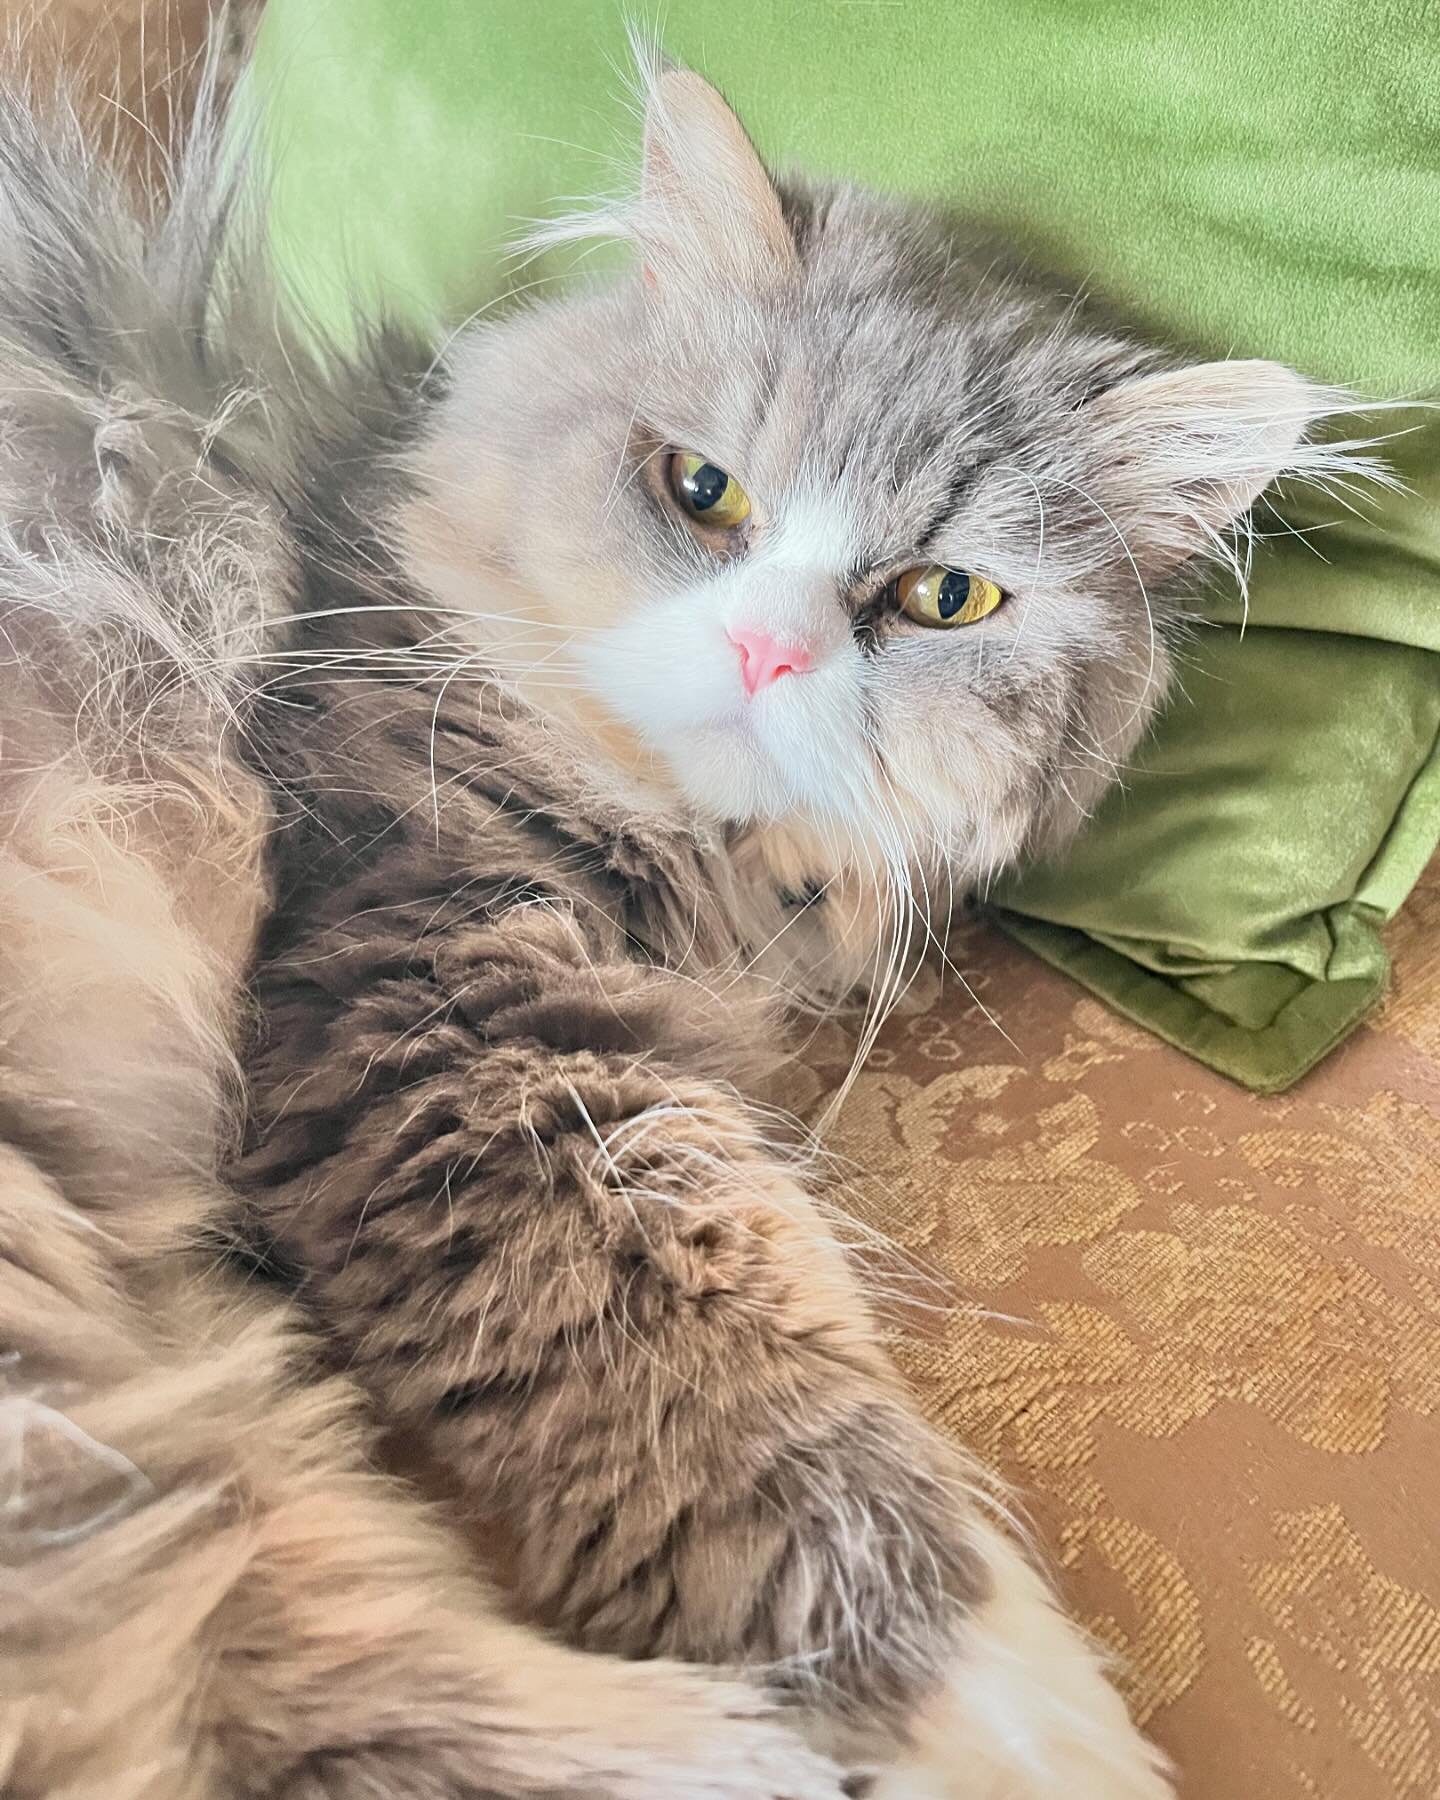 Meet General George Washington! Or as we like to call him Georgie Boy, he&rsquo;s a #persian cat and loves taking naps All day and eating All day!! 
#lazyfoxlavenderfarm #cats_of_instagram #persiancat #generalgeorgewashington